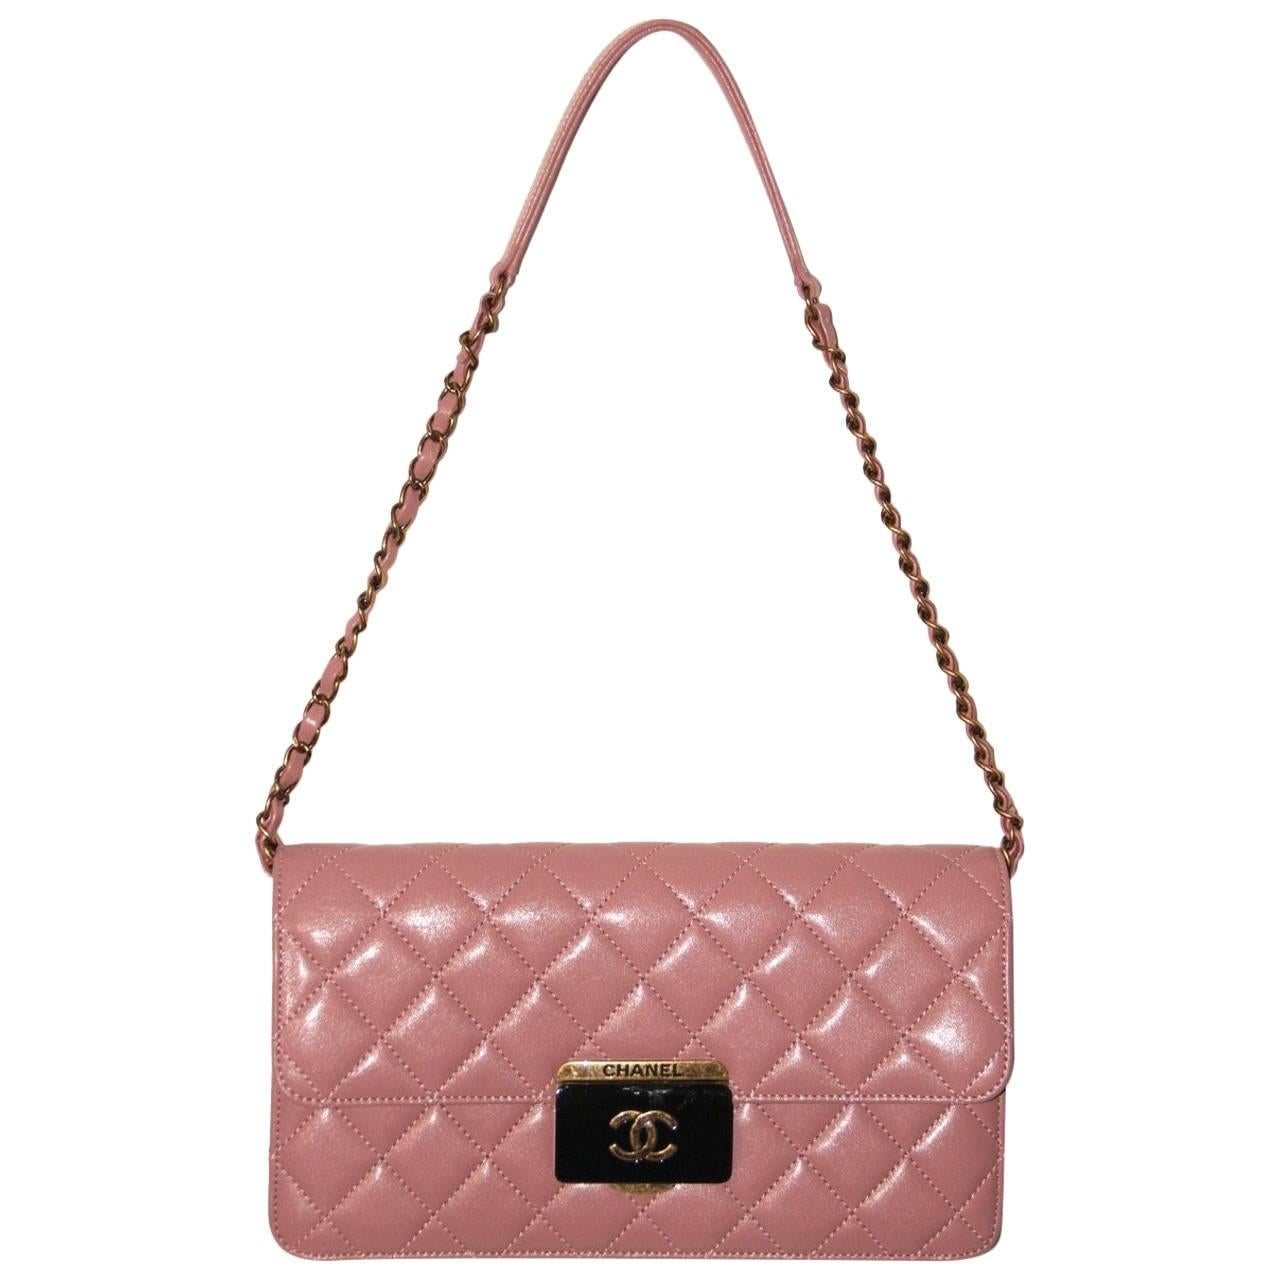 CHANEL Beauty Lock Collection Old Pink Sheepskin Leather Flap Bag 